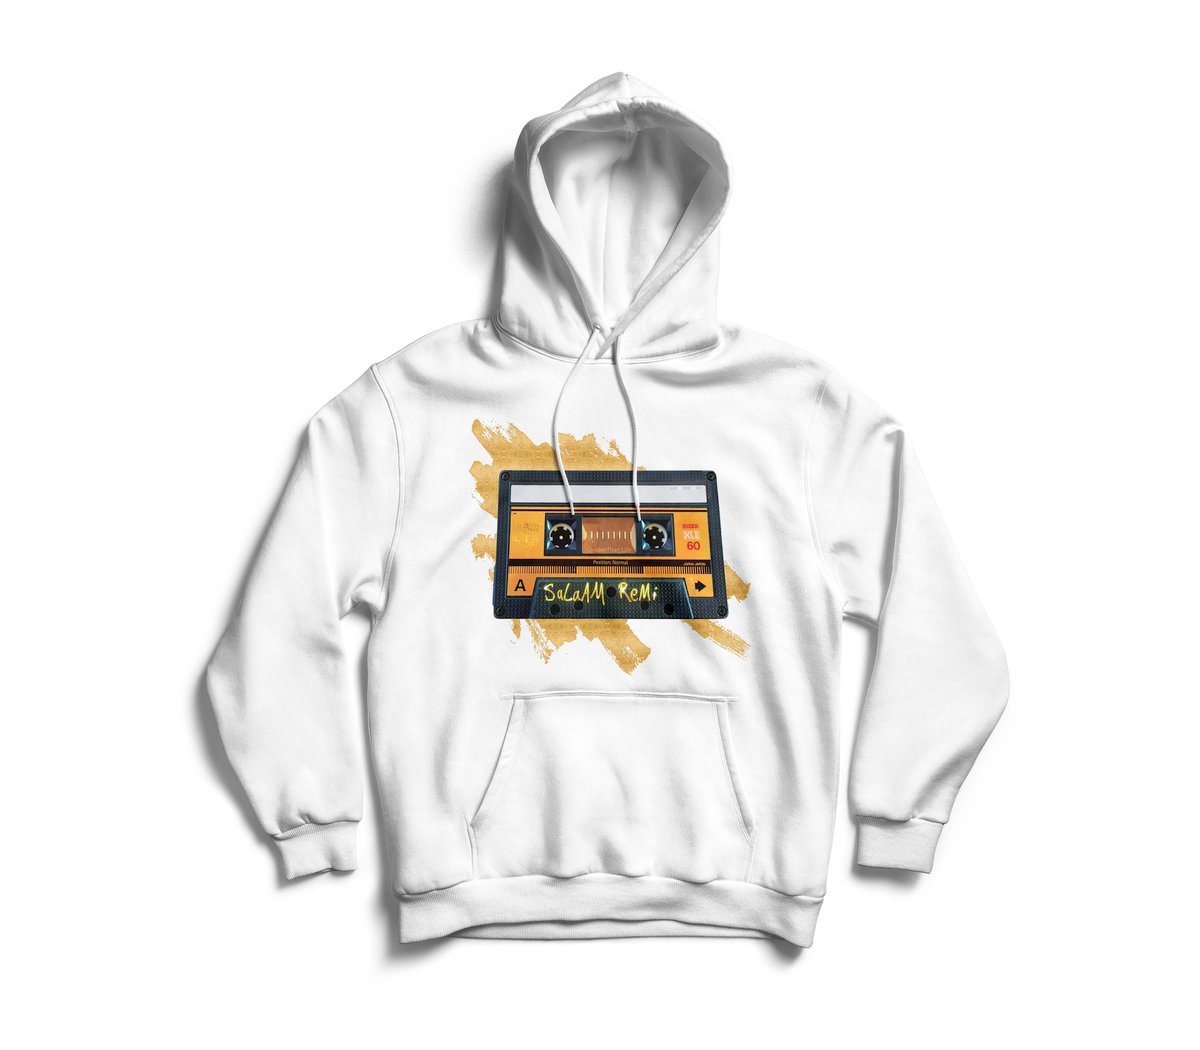 Image of Personalized White "BeAt TaPe" Hoodie